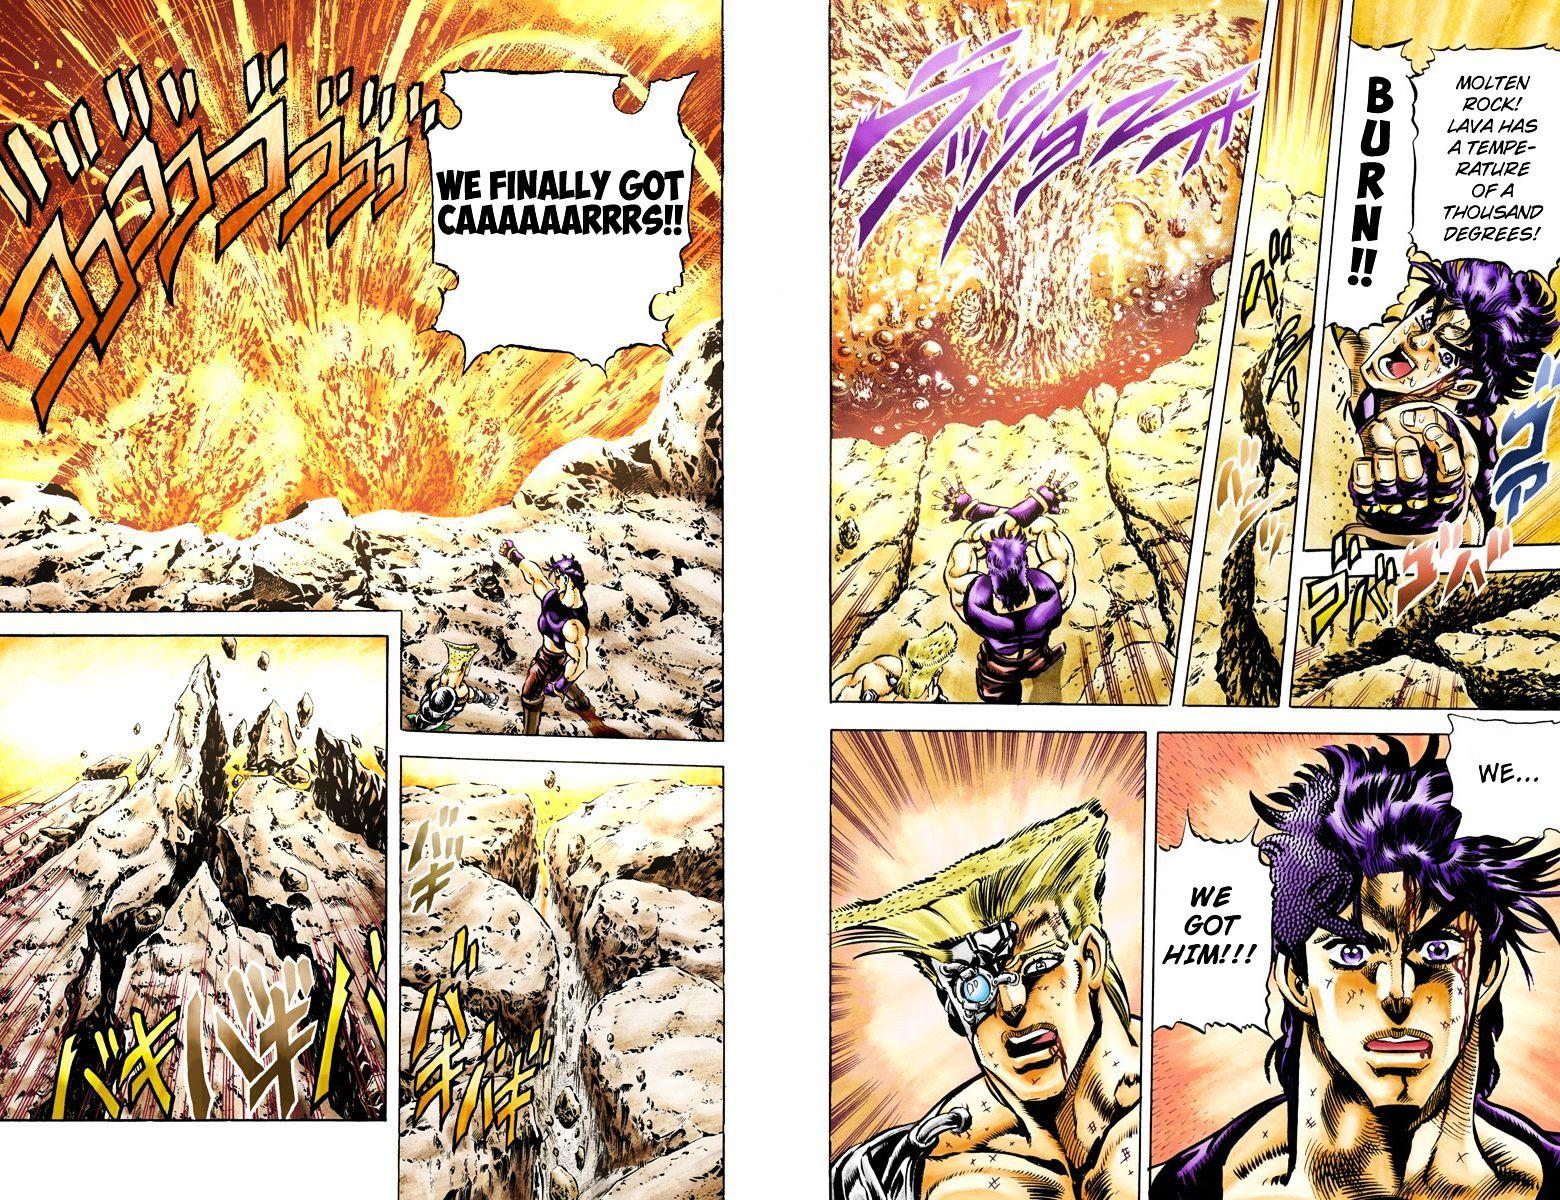 Jojo's Bizarre Adventure Vol.12 Chapter 111 : The Man Who Became A God (Official Color Scans) page 6 - 